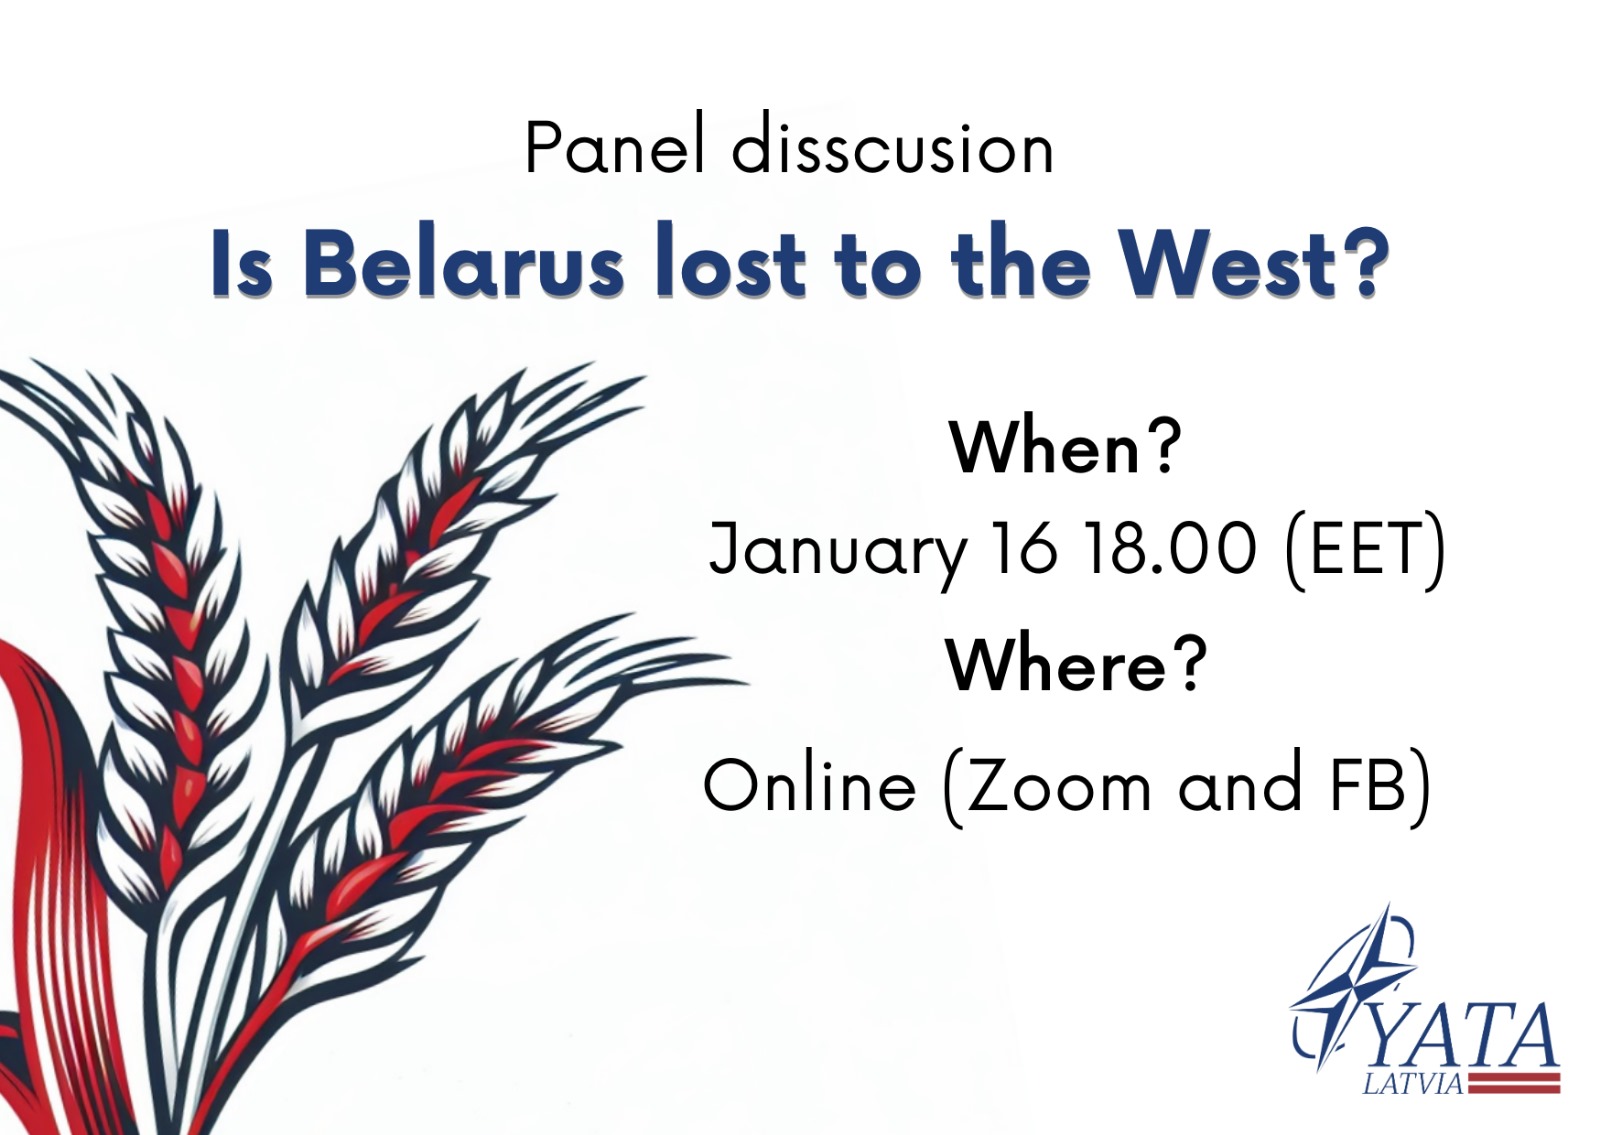 Panel discussion  “Is Belarus lost to the West?”